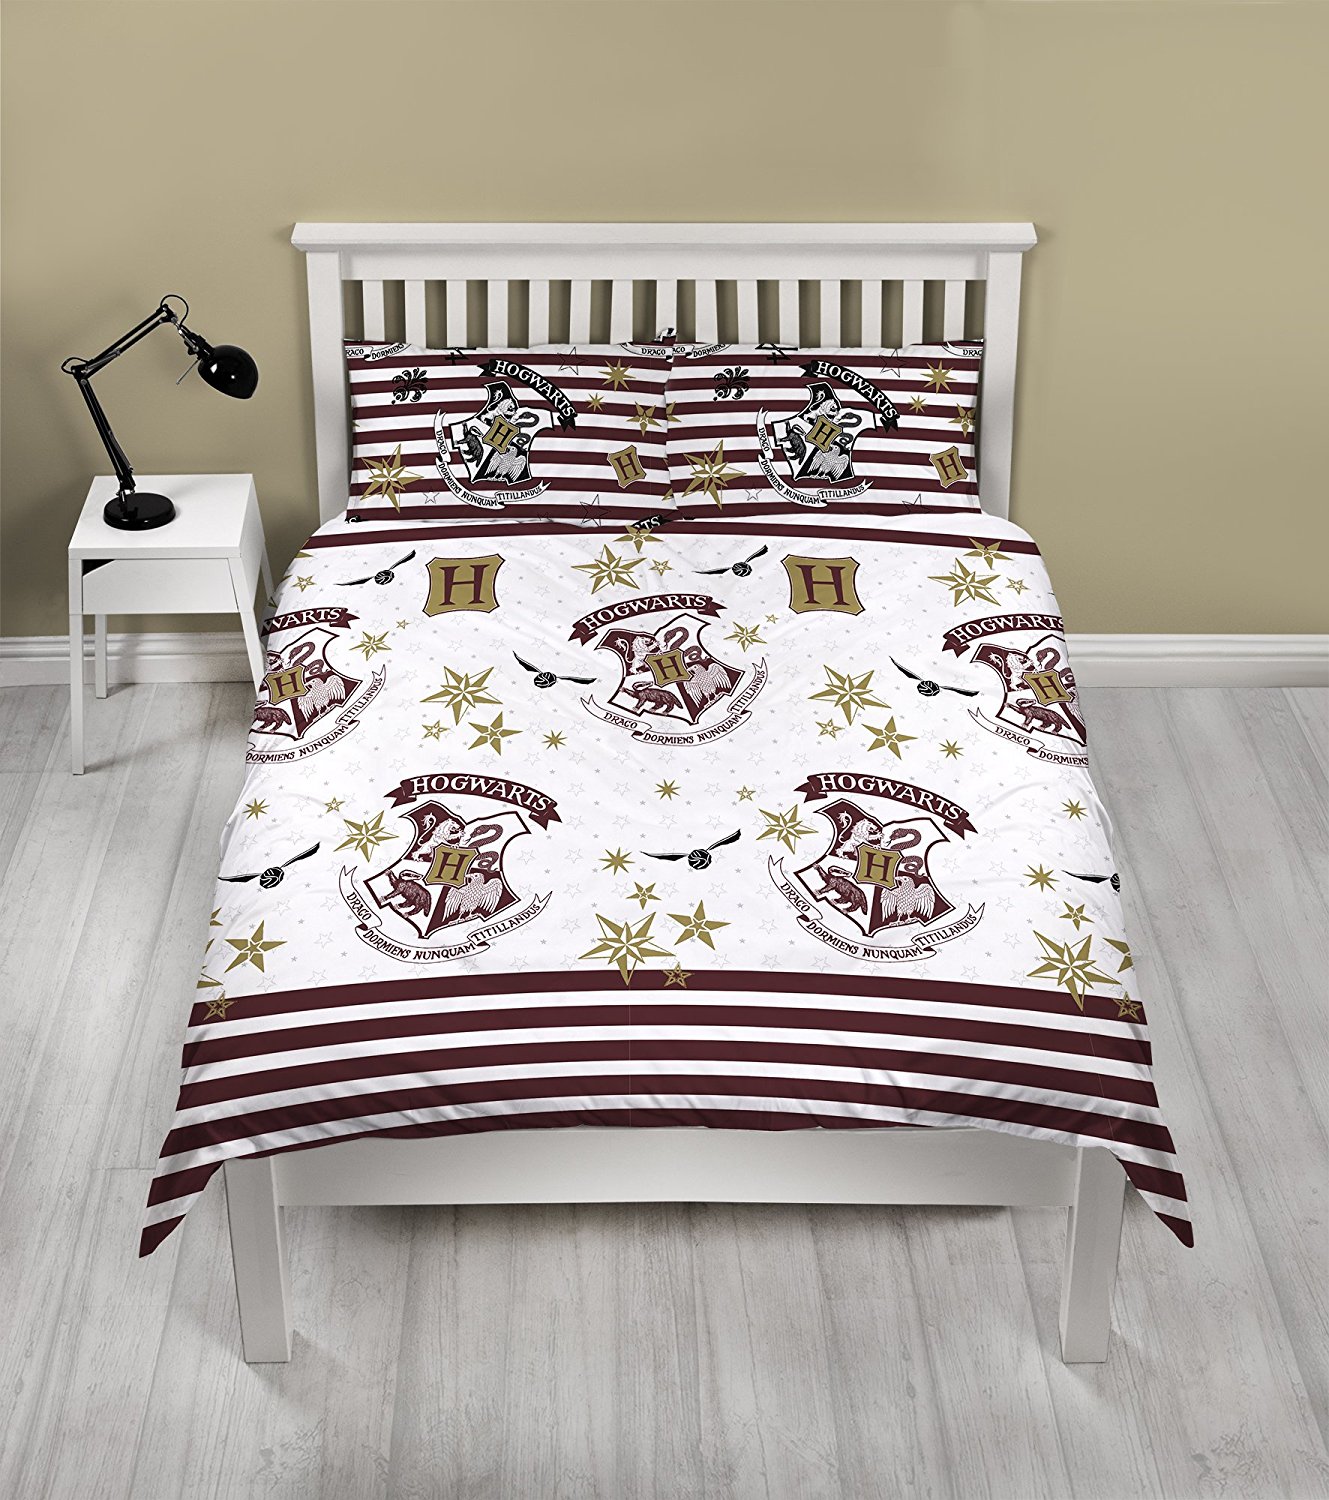 Double Duvet and Pillows Set: Harry Potter - Muggles